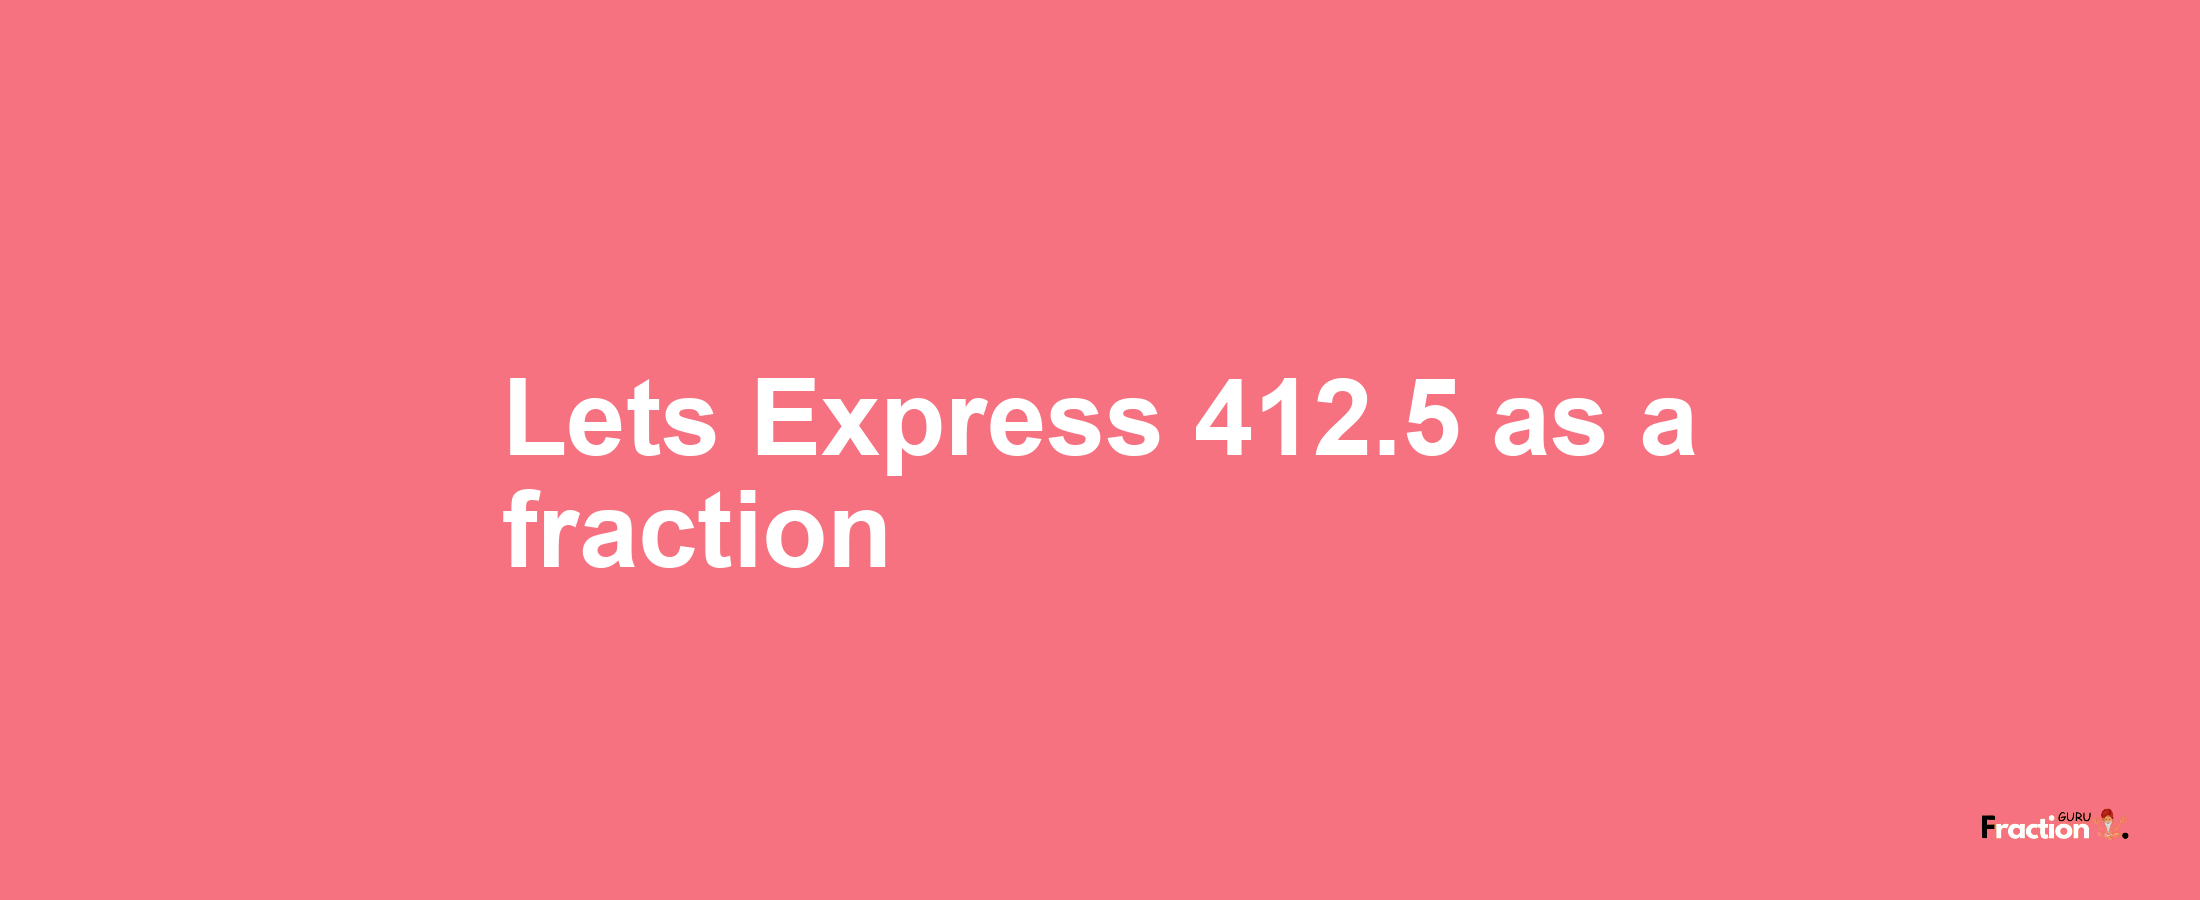 Lets Express 412.5 as afraction